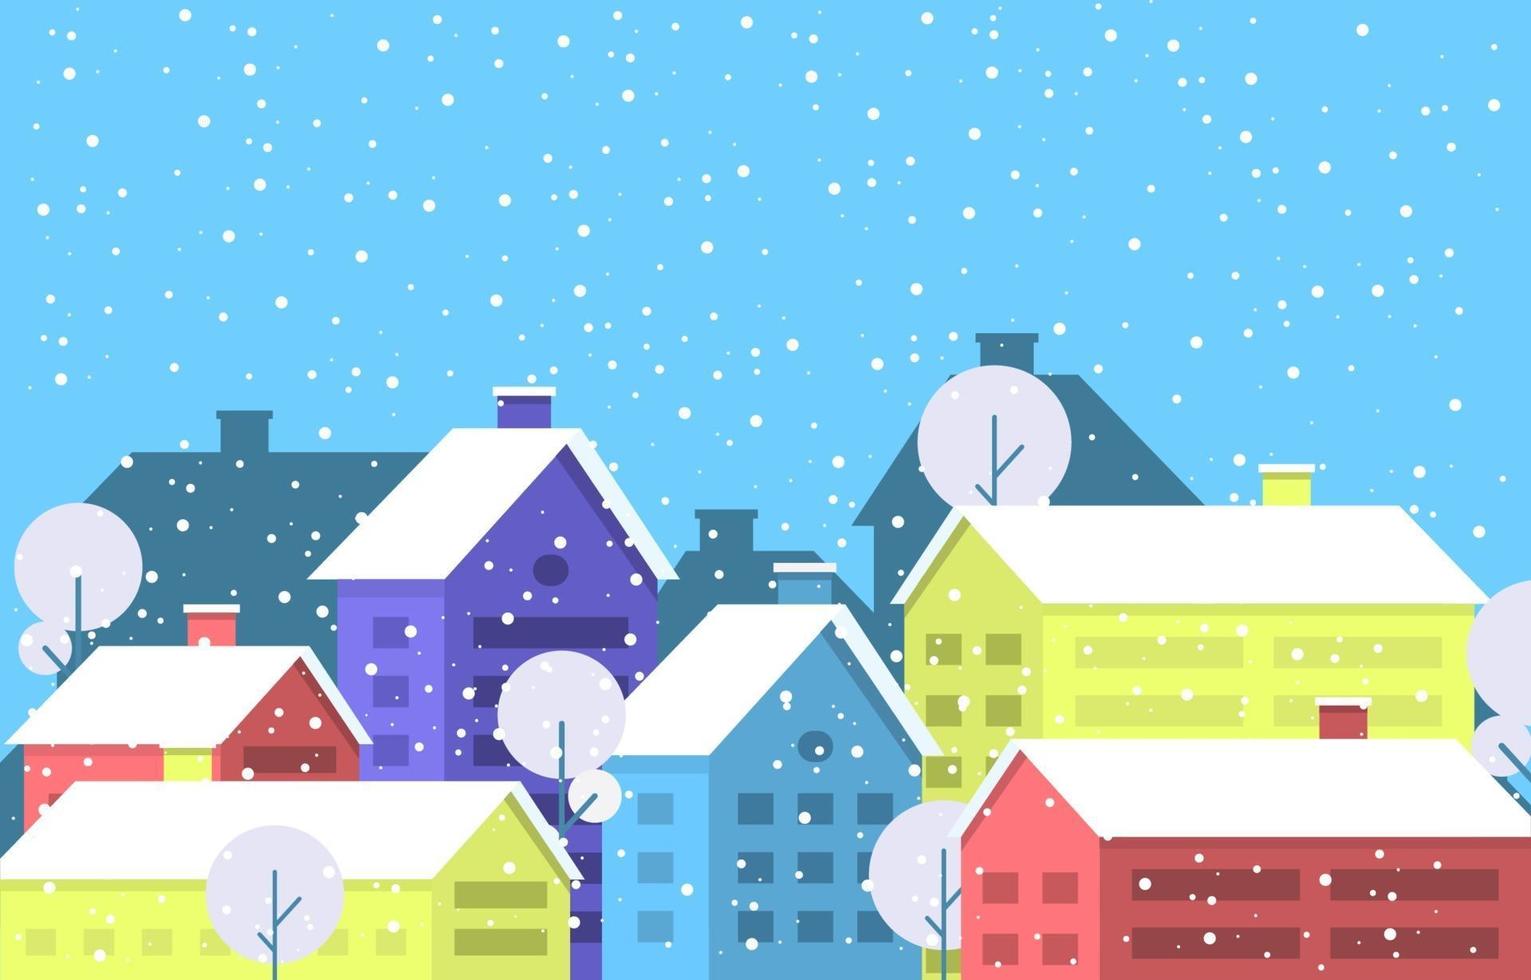 Cozy Snowy Winter City Scene with Trees and Home vector